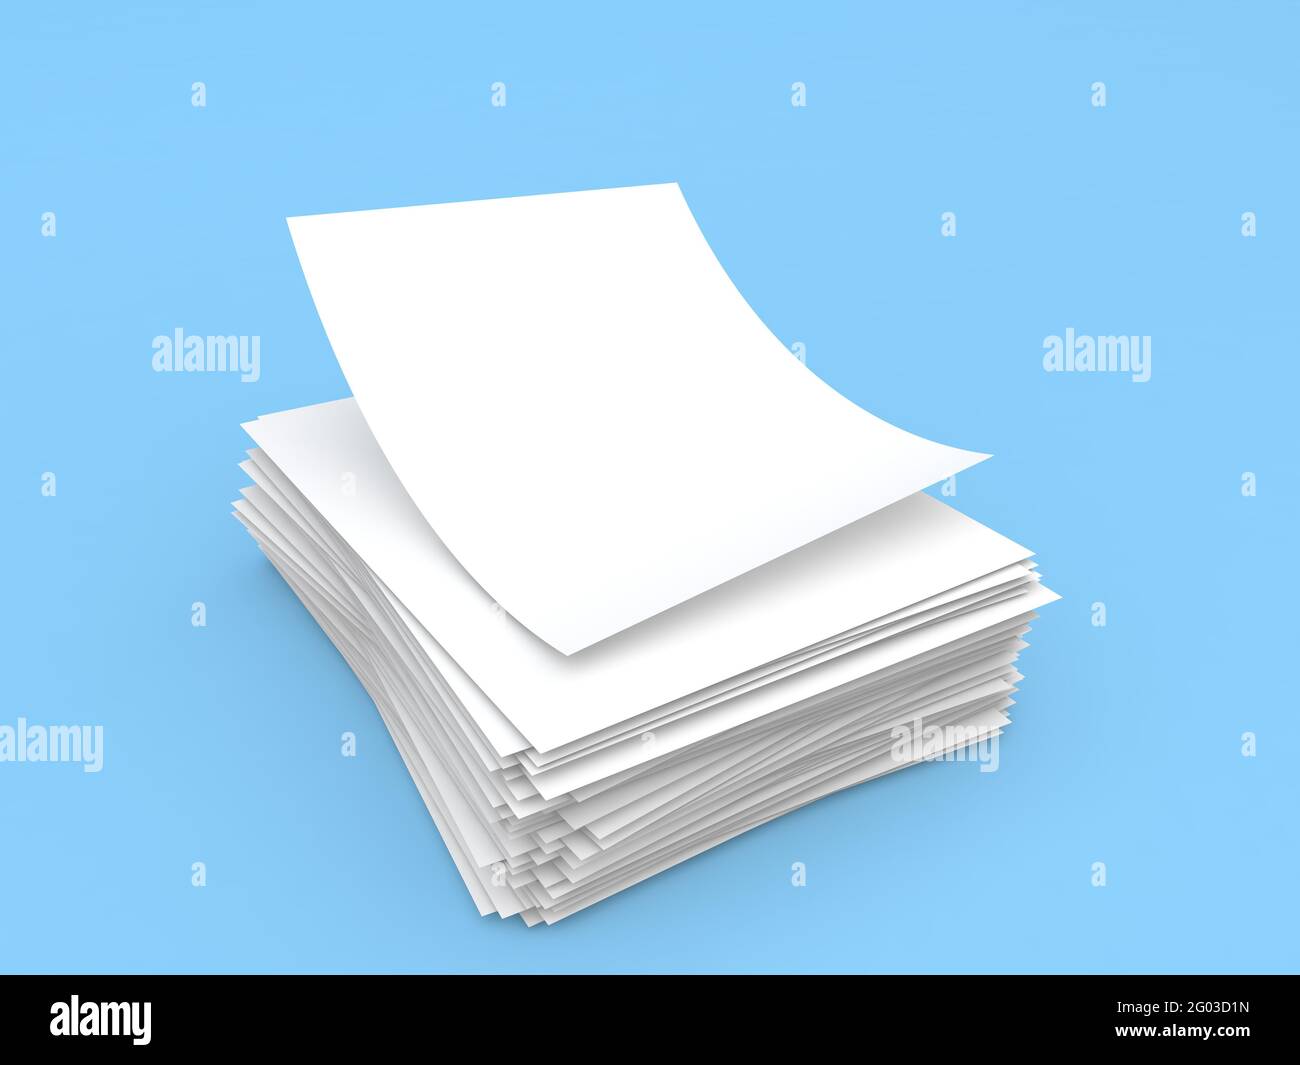 Stack of A4 paper on a blue background. 3d render illustration. Stock Photo